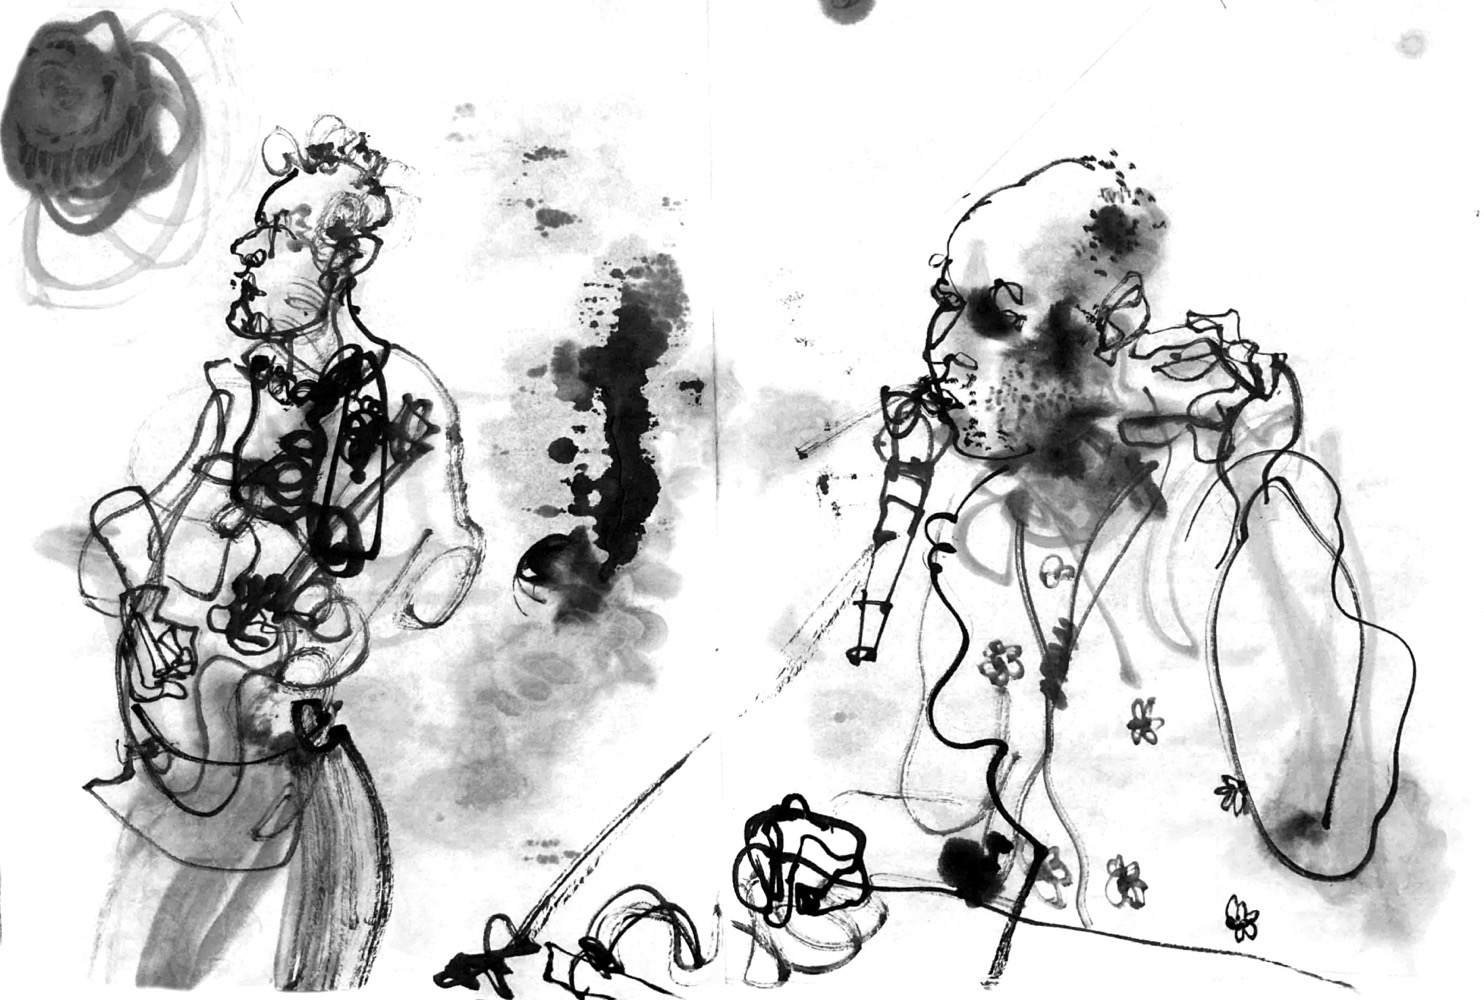 Ink ddawing of two musicianss, baseplayer and guy behind desk with electronics, both have mics too.